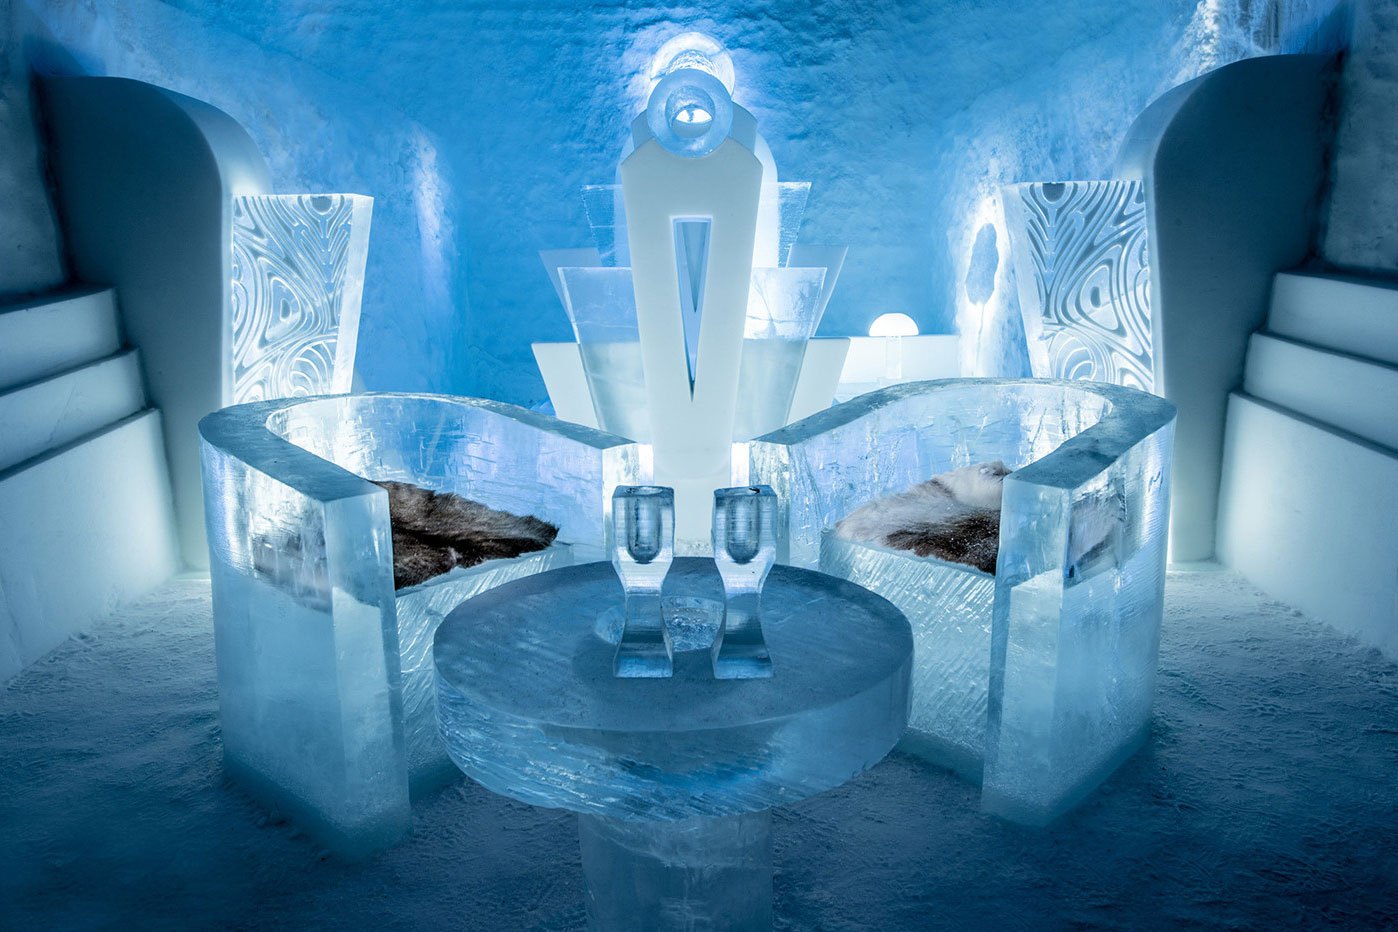 worlds-first-permanent-ice-hotel-10